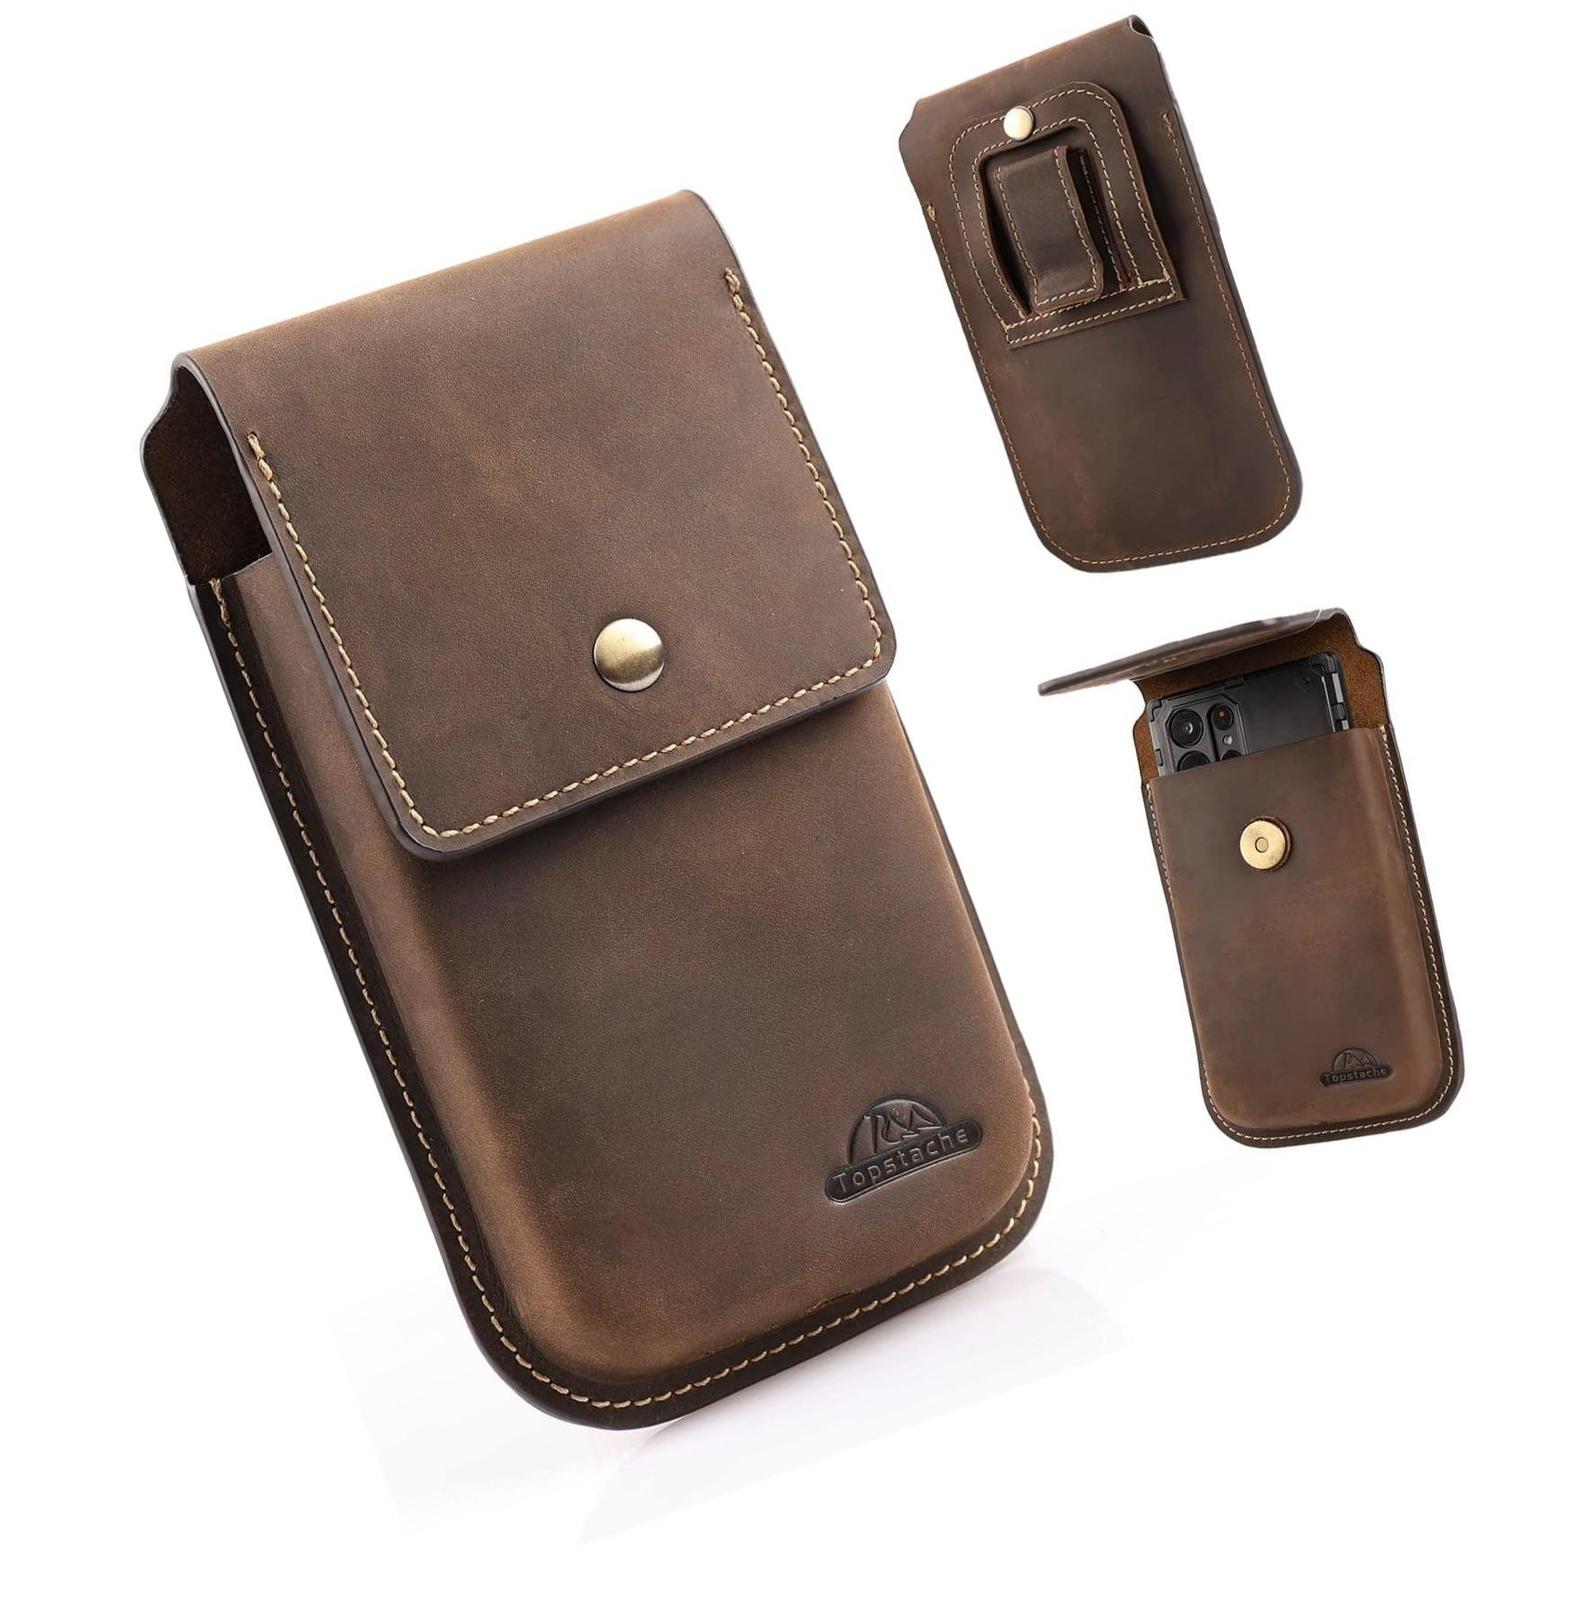 Primary image for Leather Phone Holster for Belt,Flip Cell Phone for